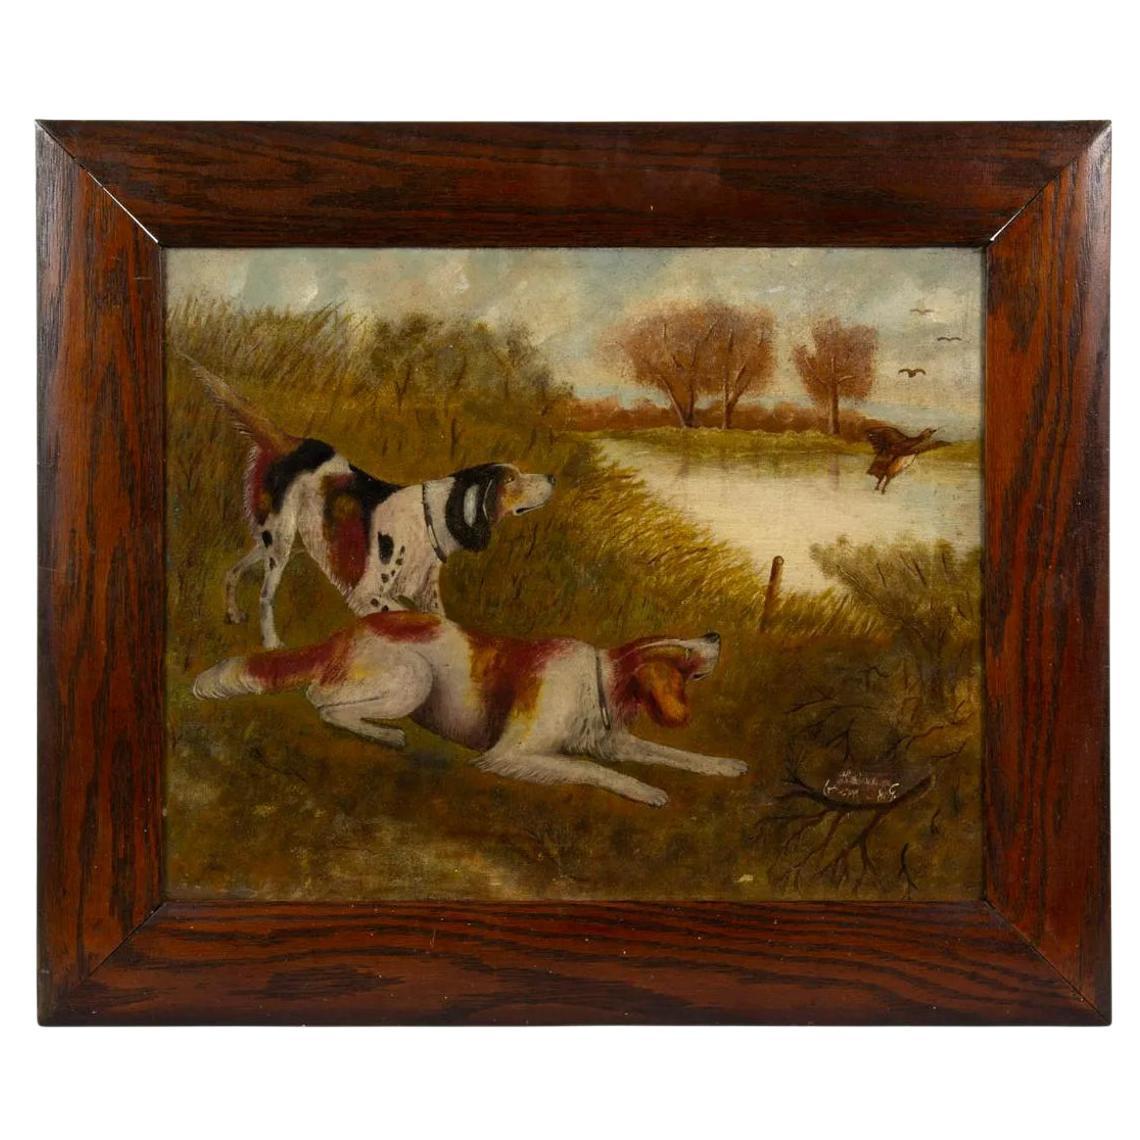 Late 19th Century Folk Art Oil on Canvas Painting of Dogs Hunting on Rural Lake